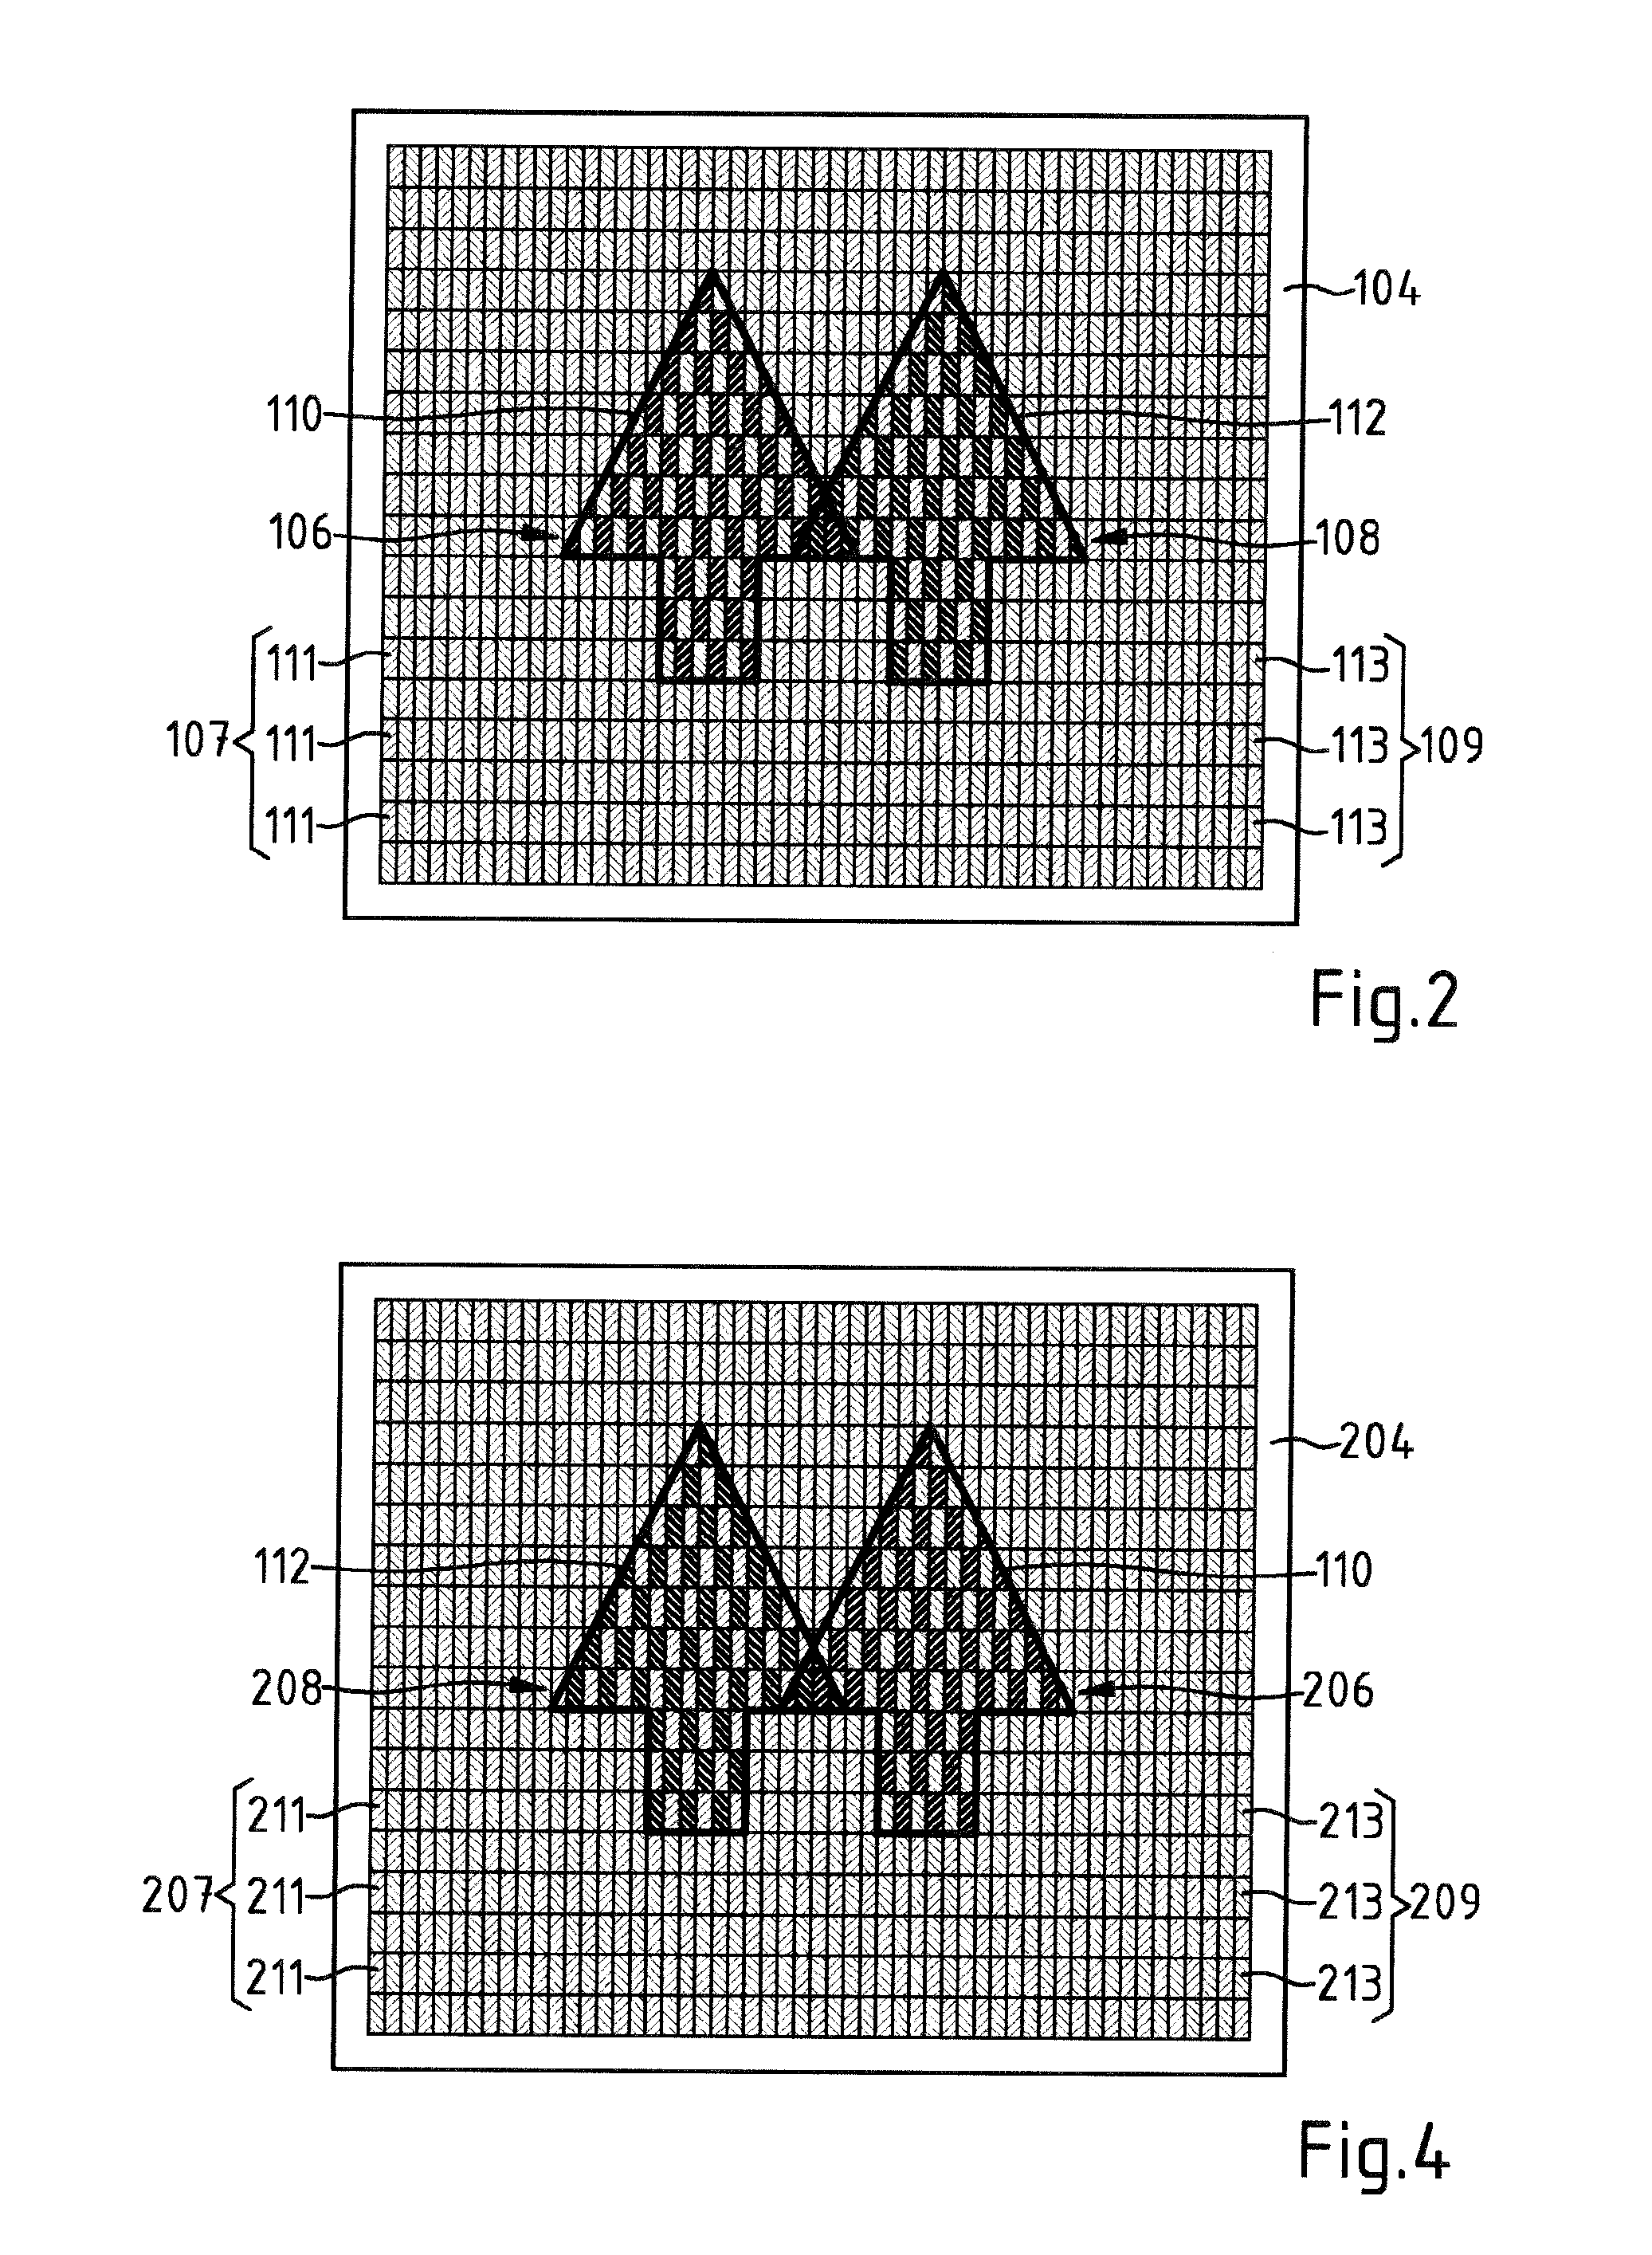 Visualization system for three-dimensional images